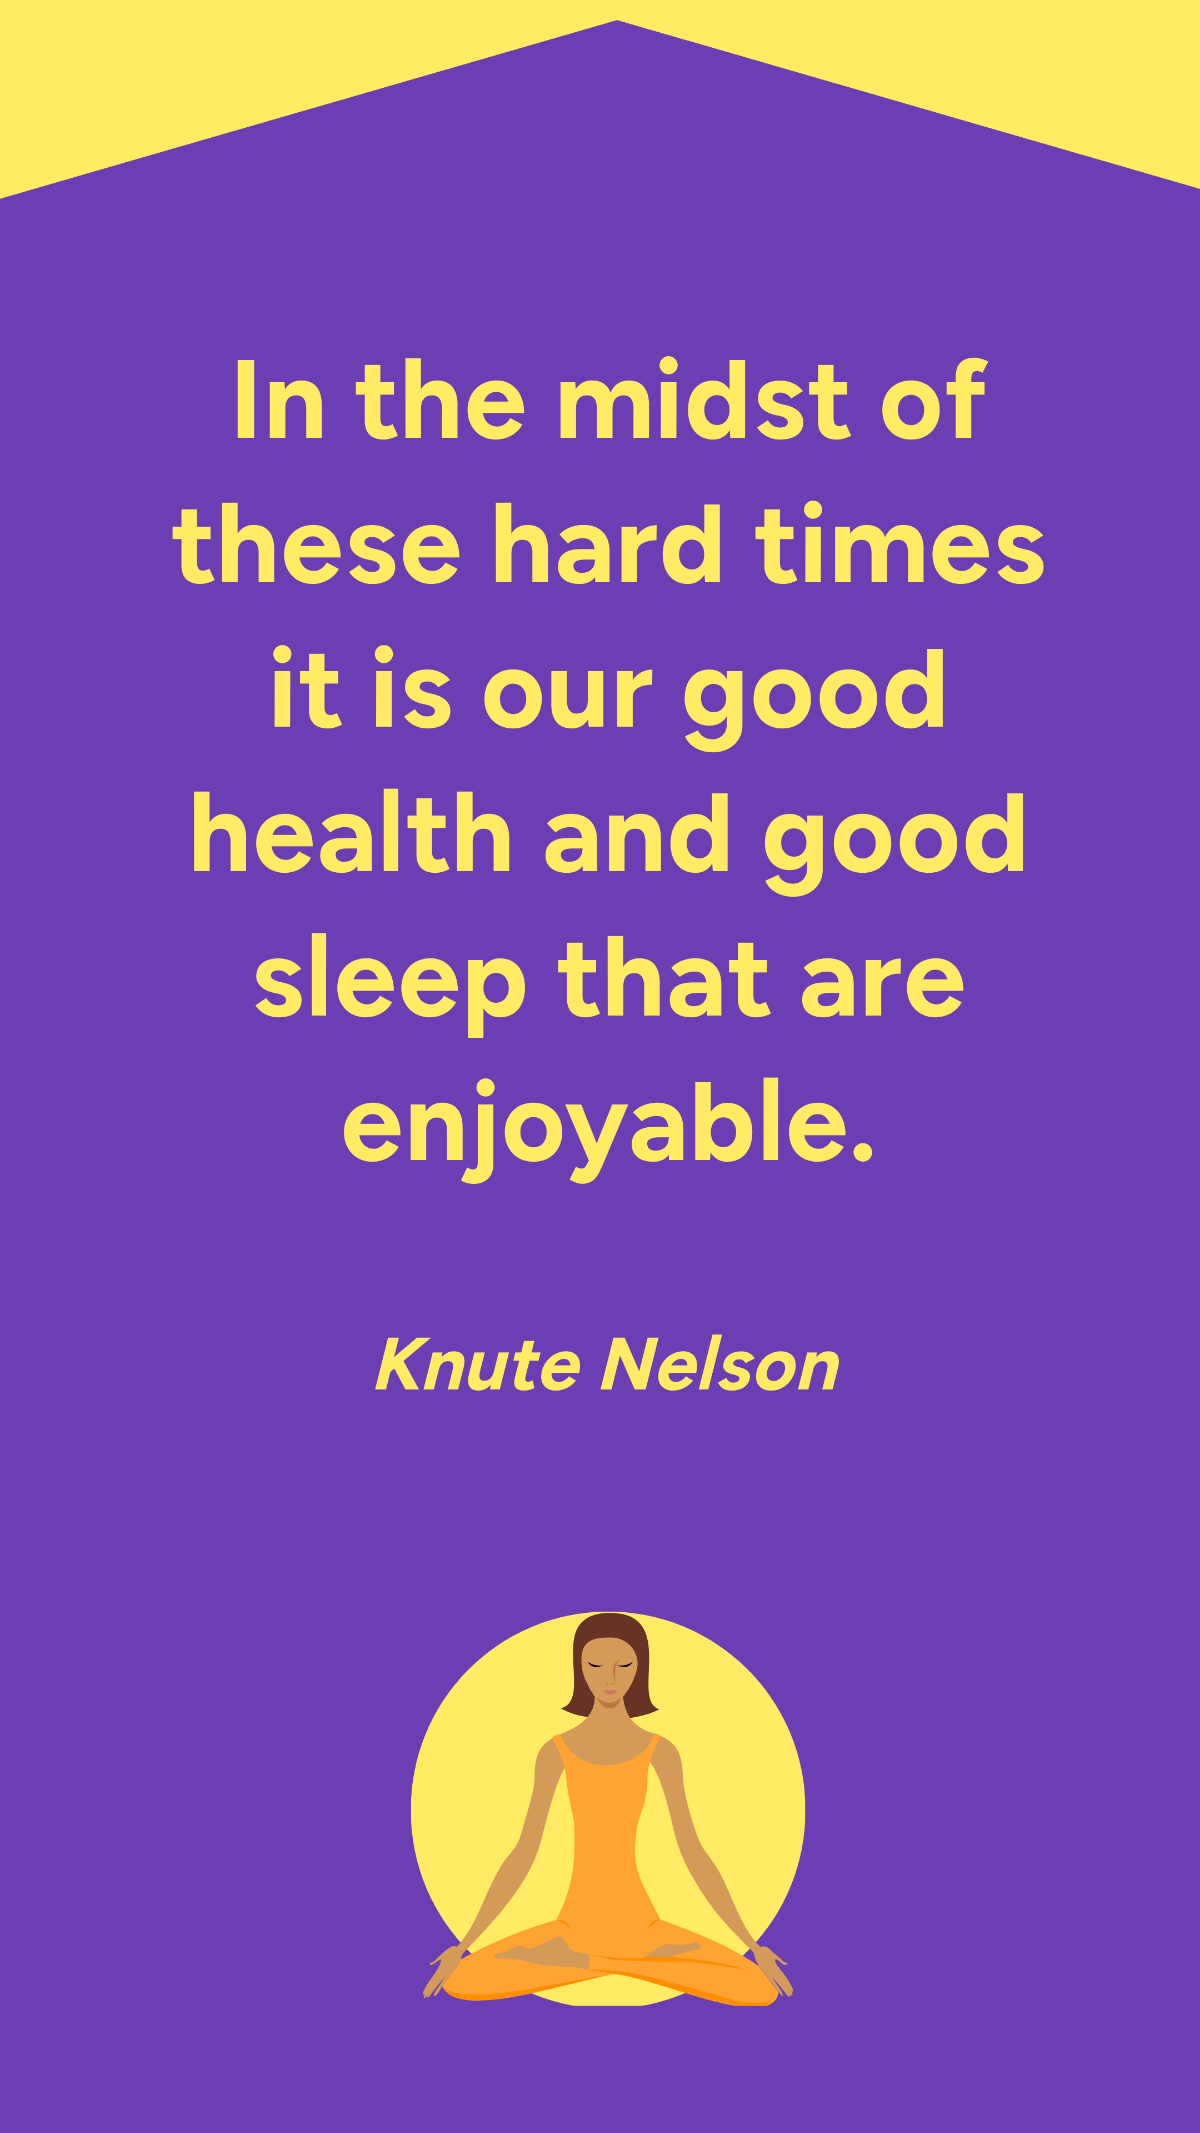 Knute Nelson - In the midst of these hard times it is our good health and good sleep that are enjoyable.